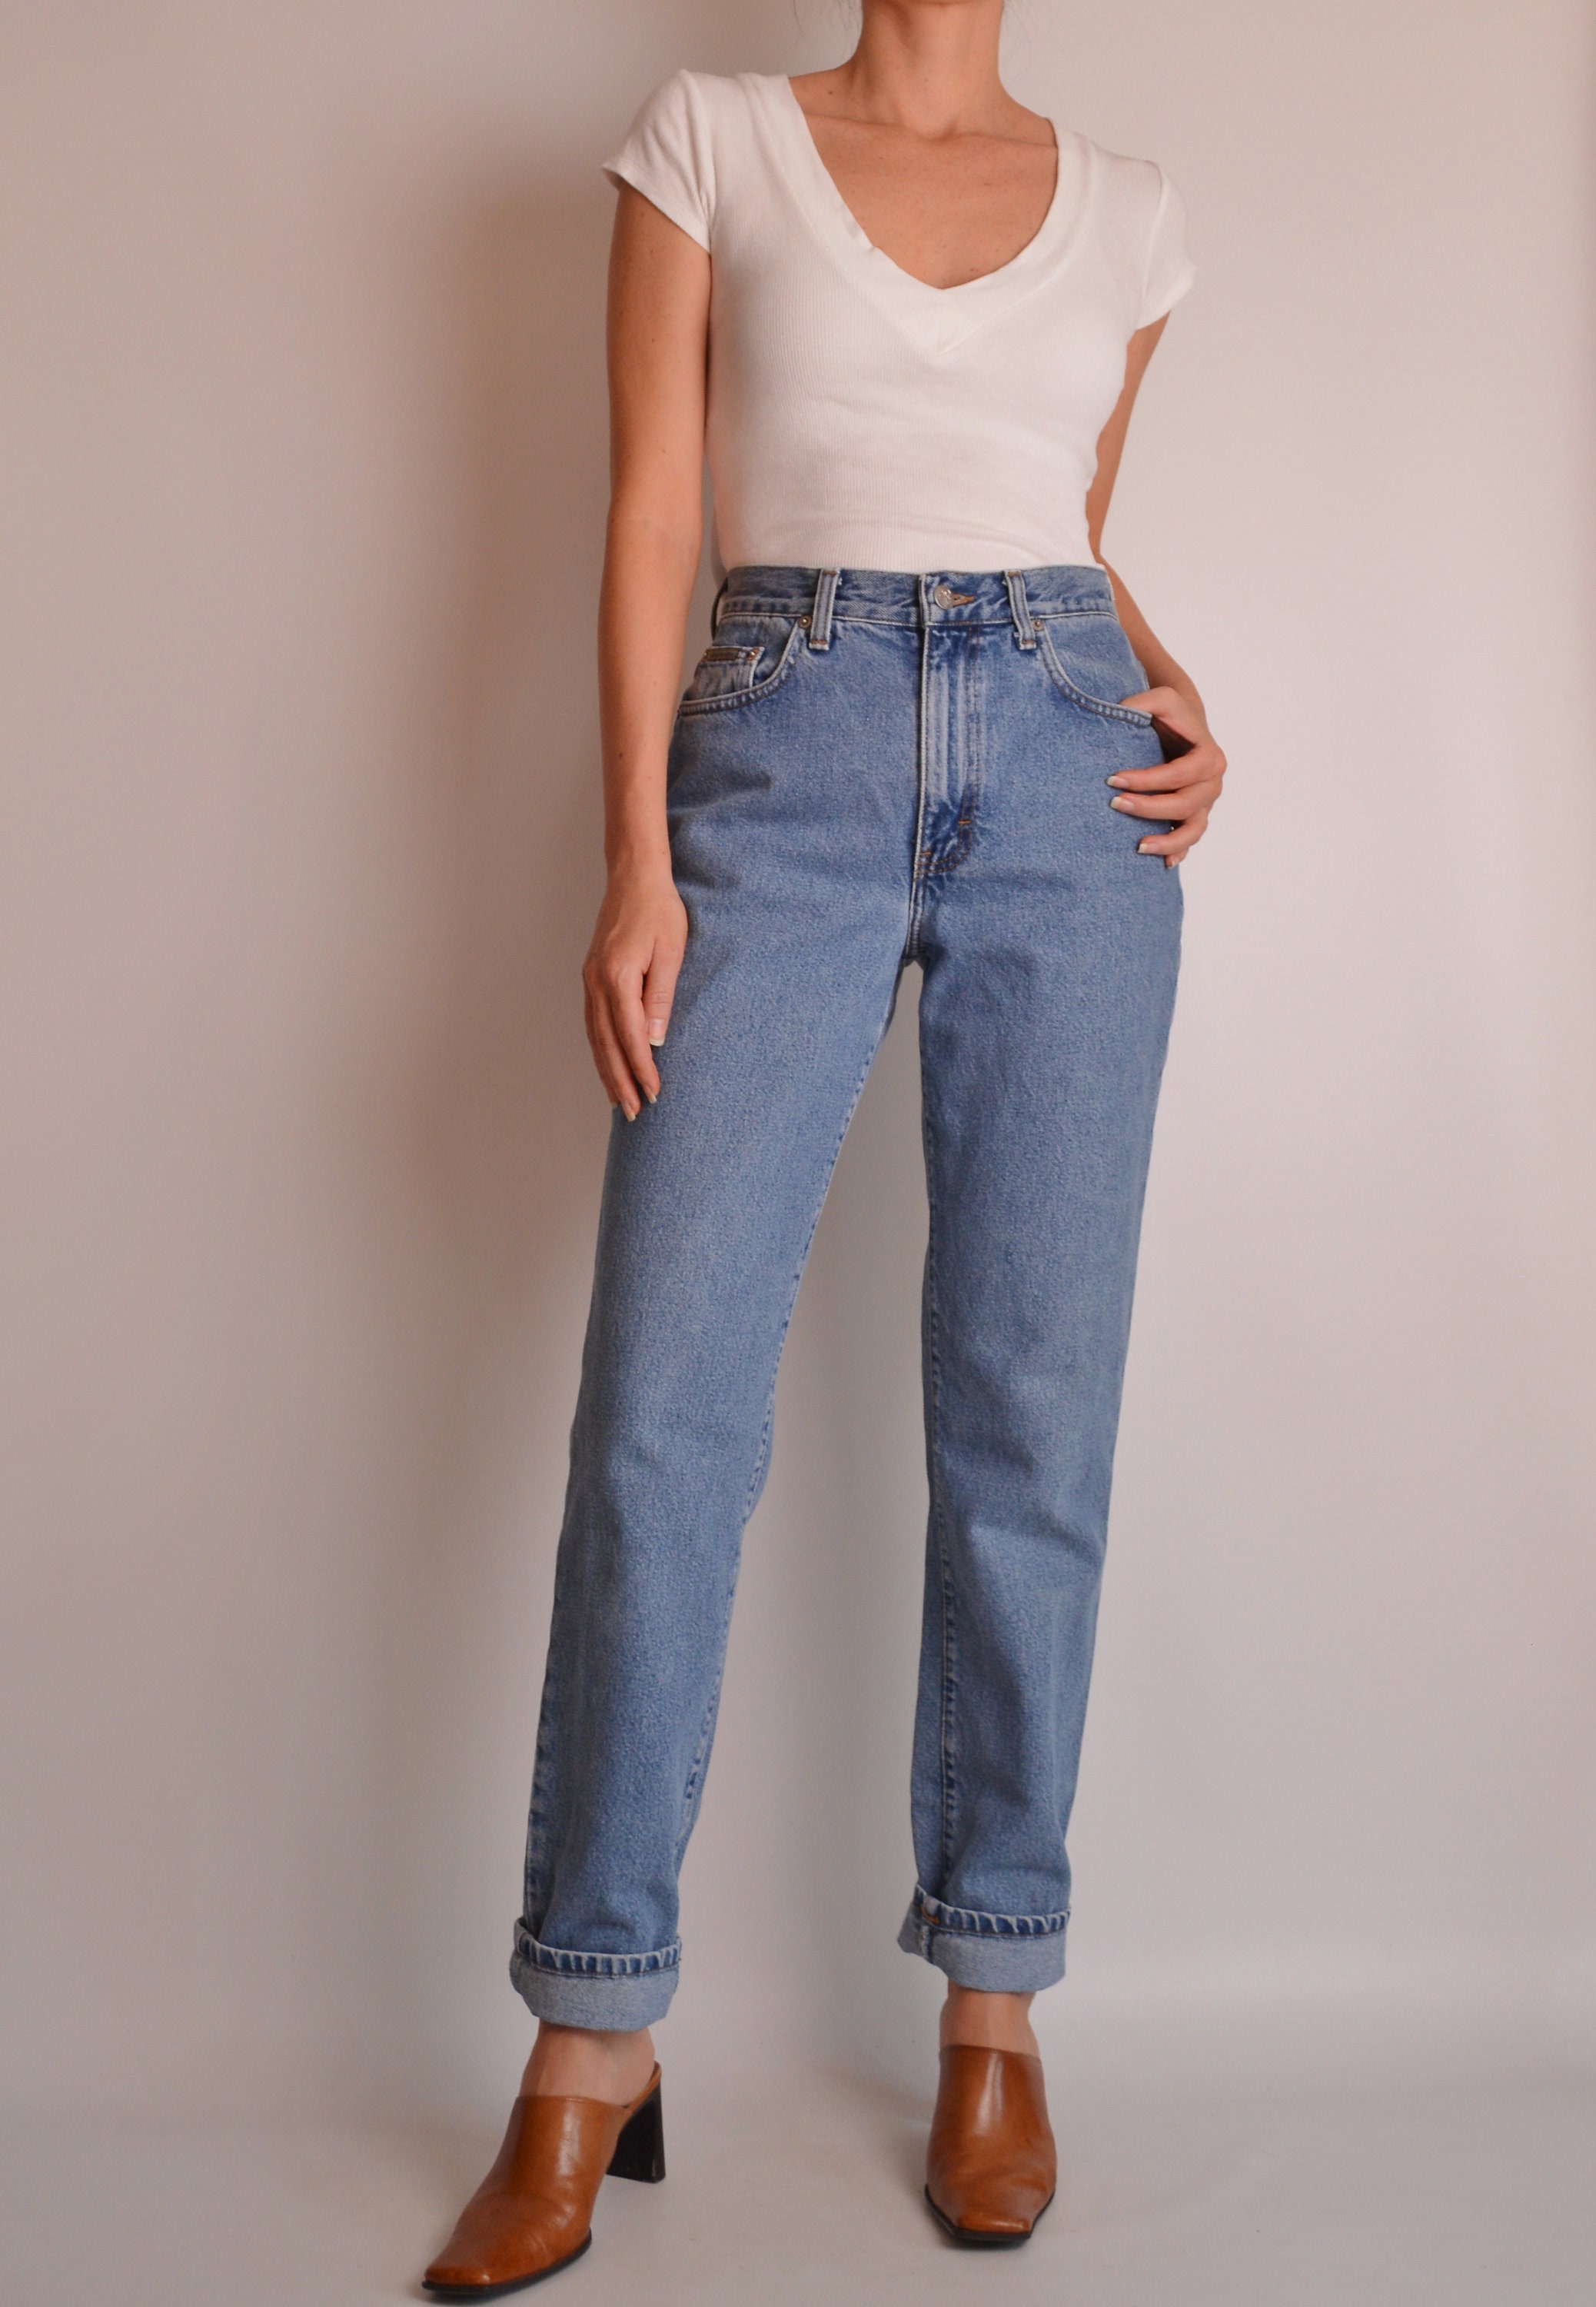 Vintage Calvin Klein Relaxed Fit Jeans (27.5W)